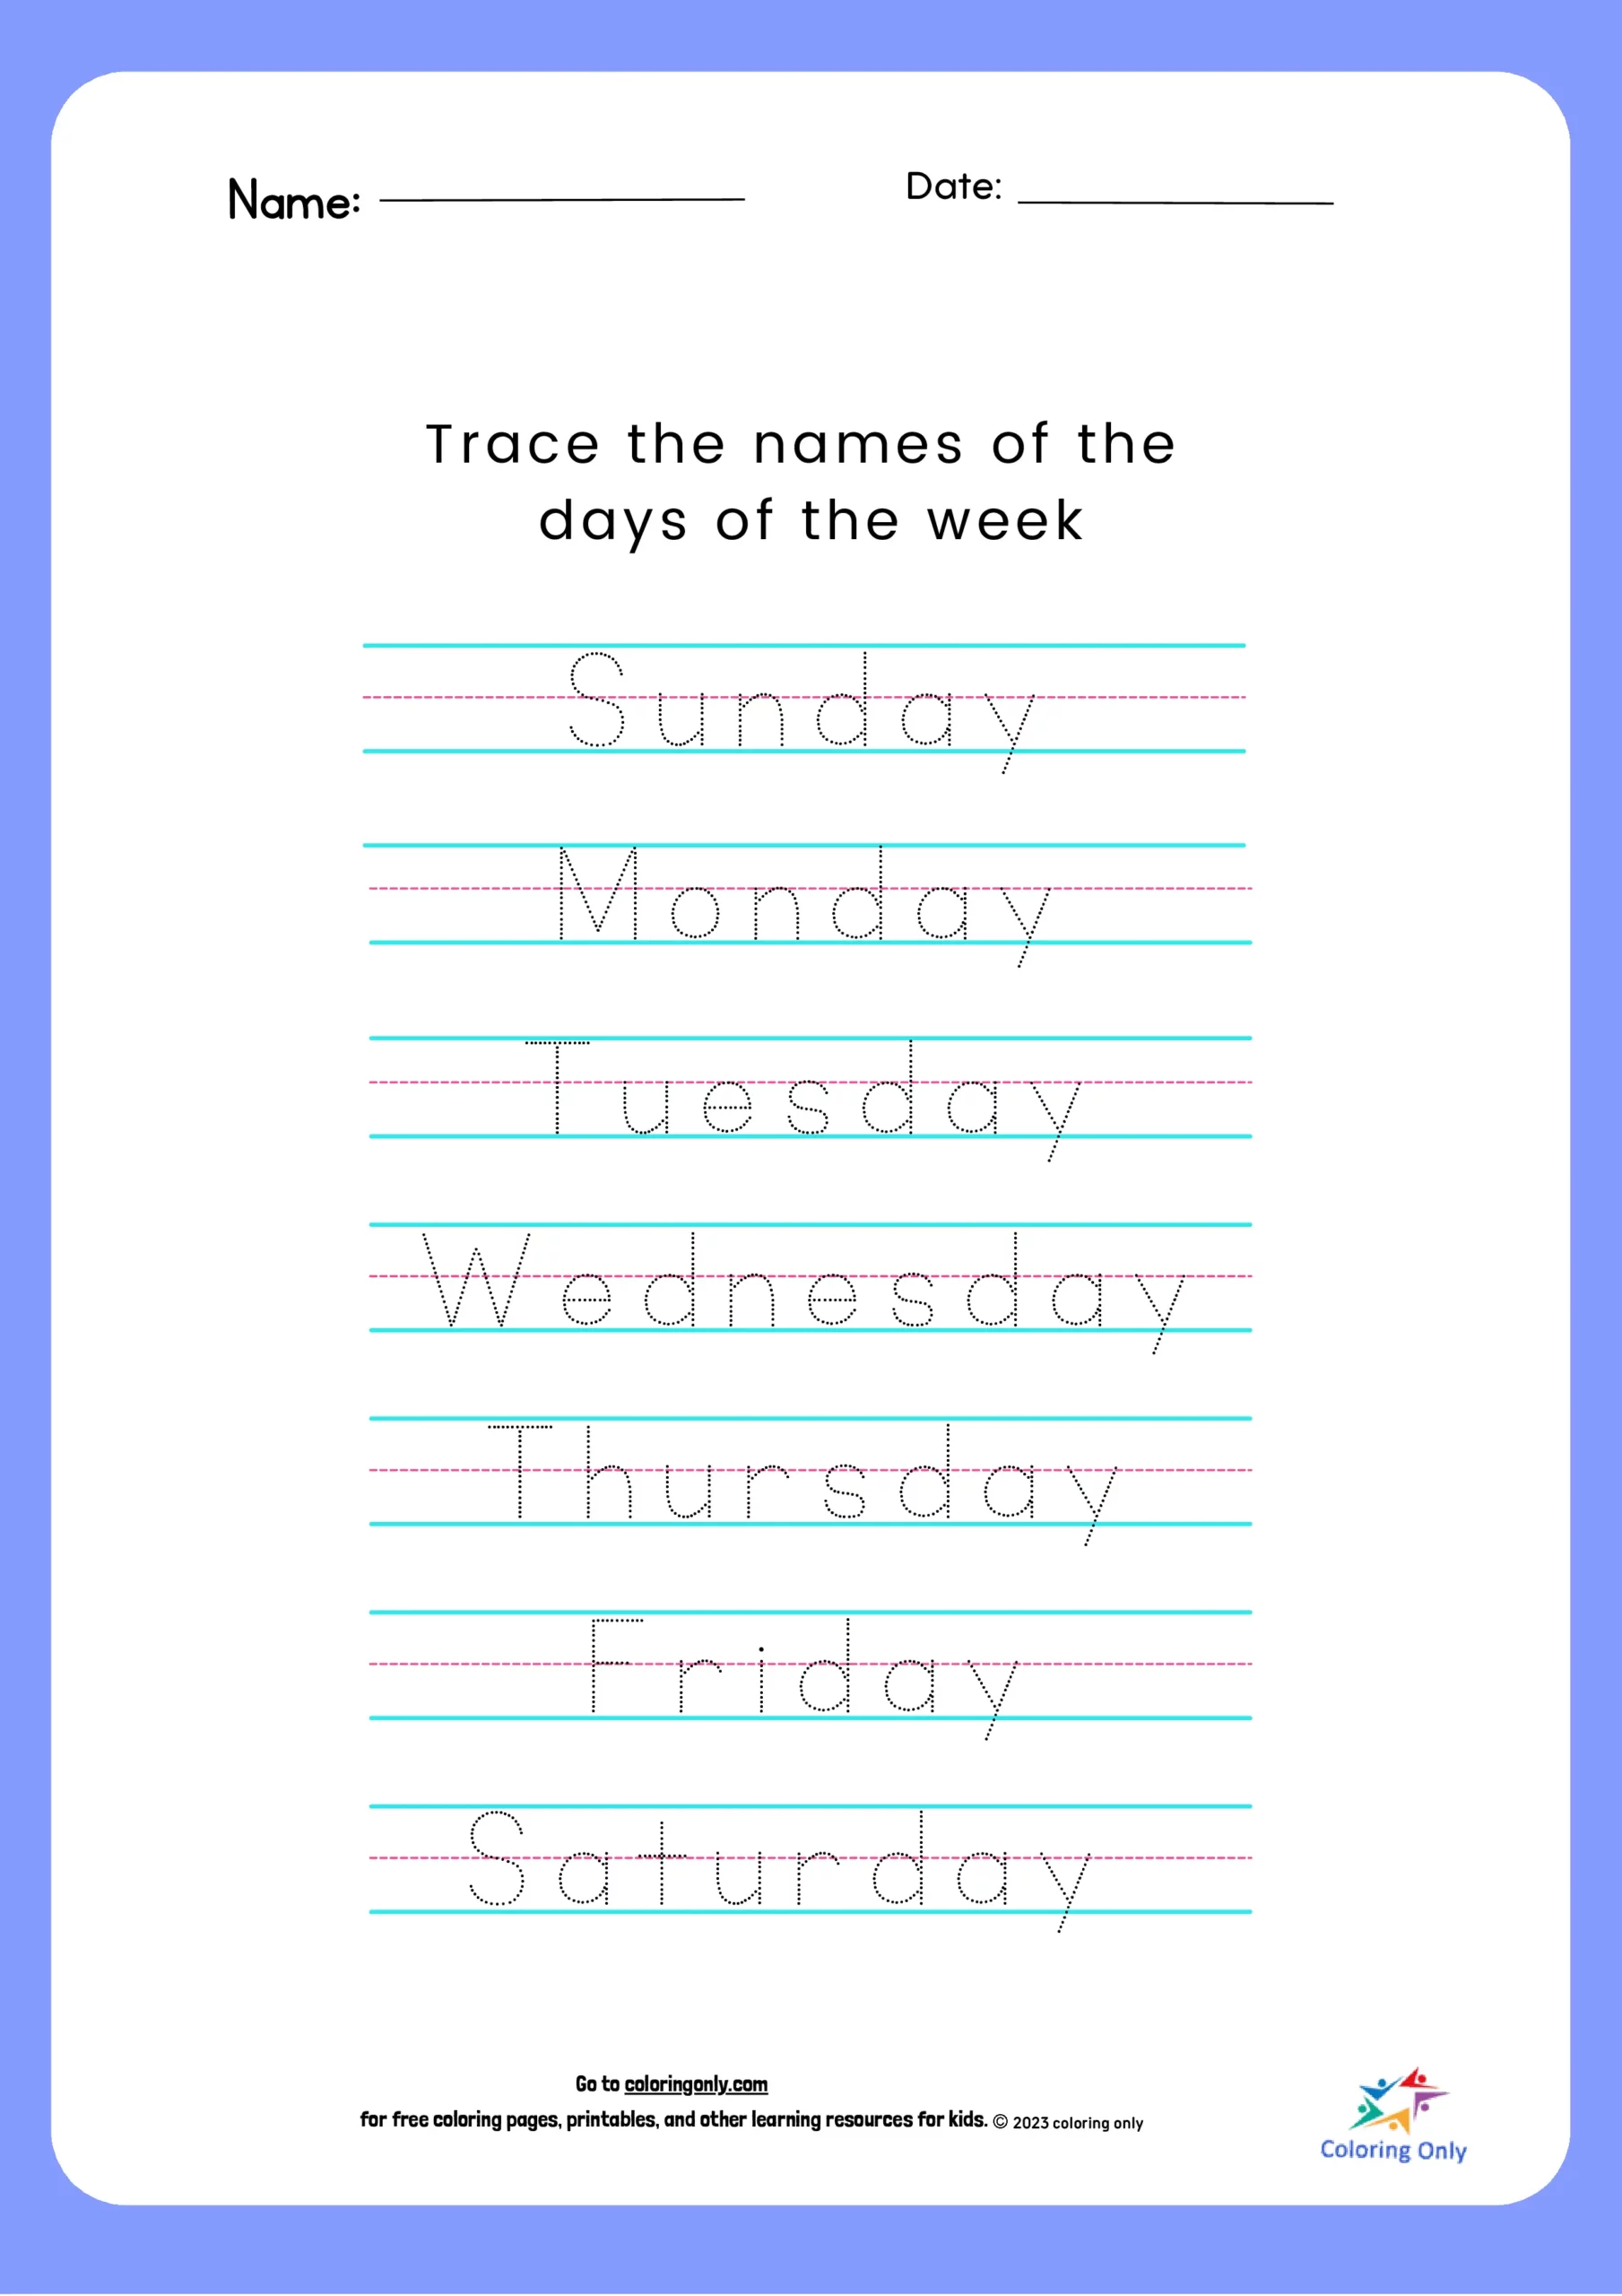 Trace the Names of the days of the Week